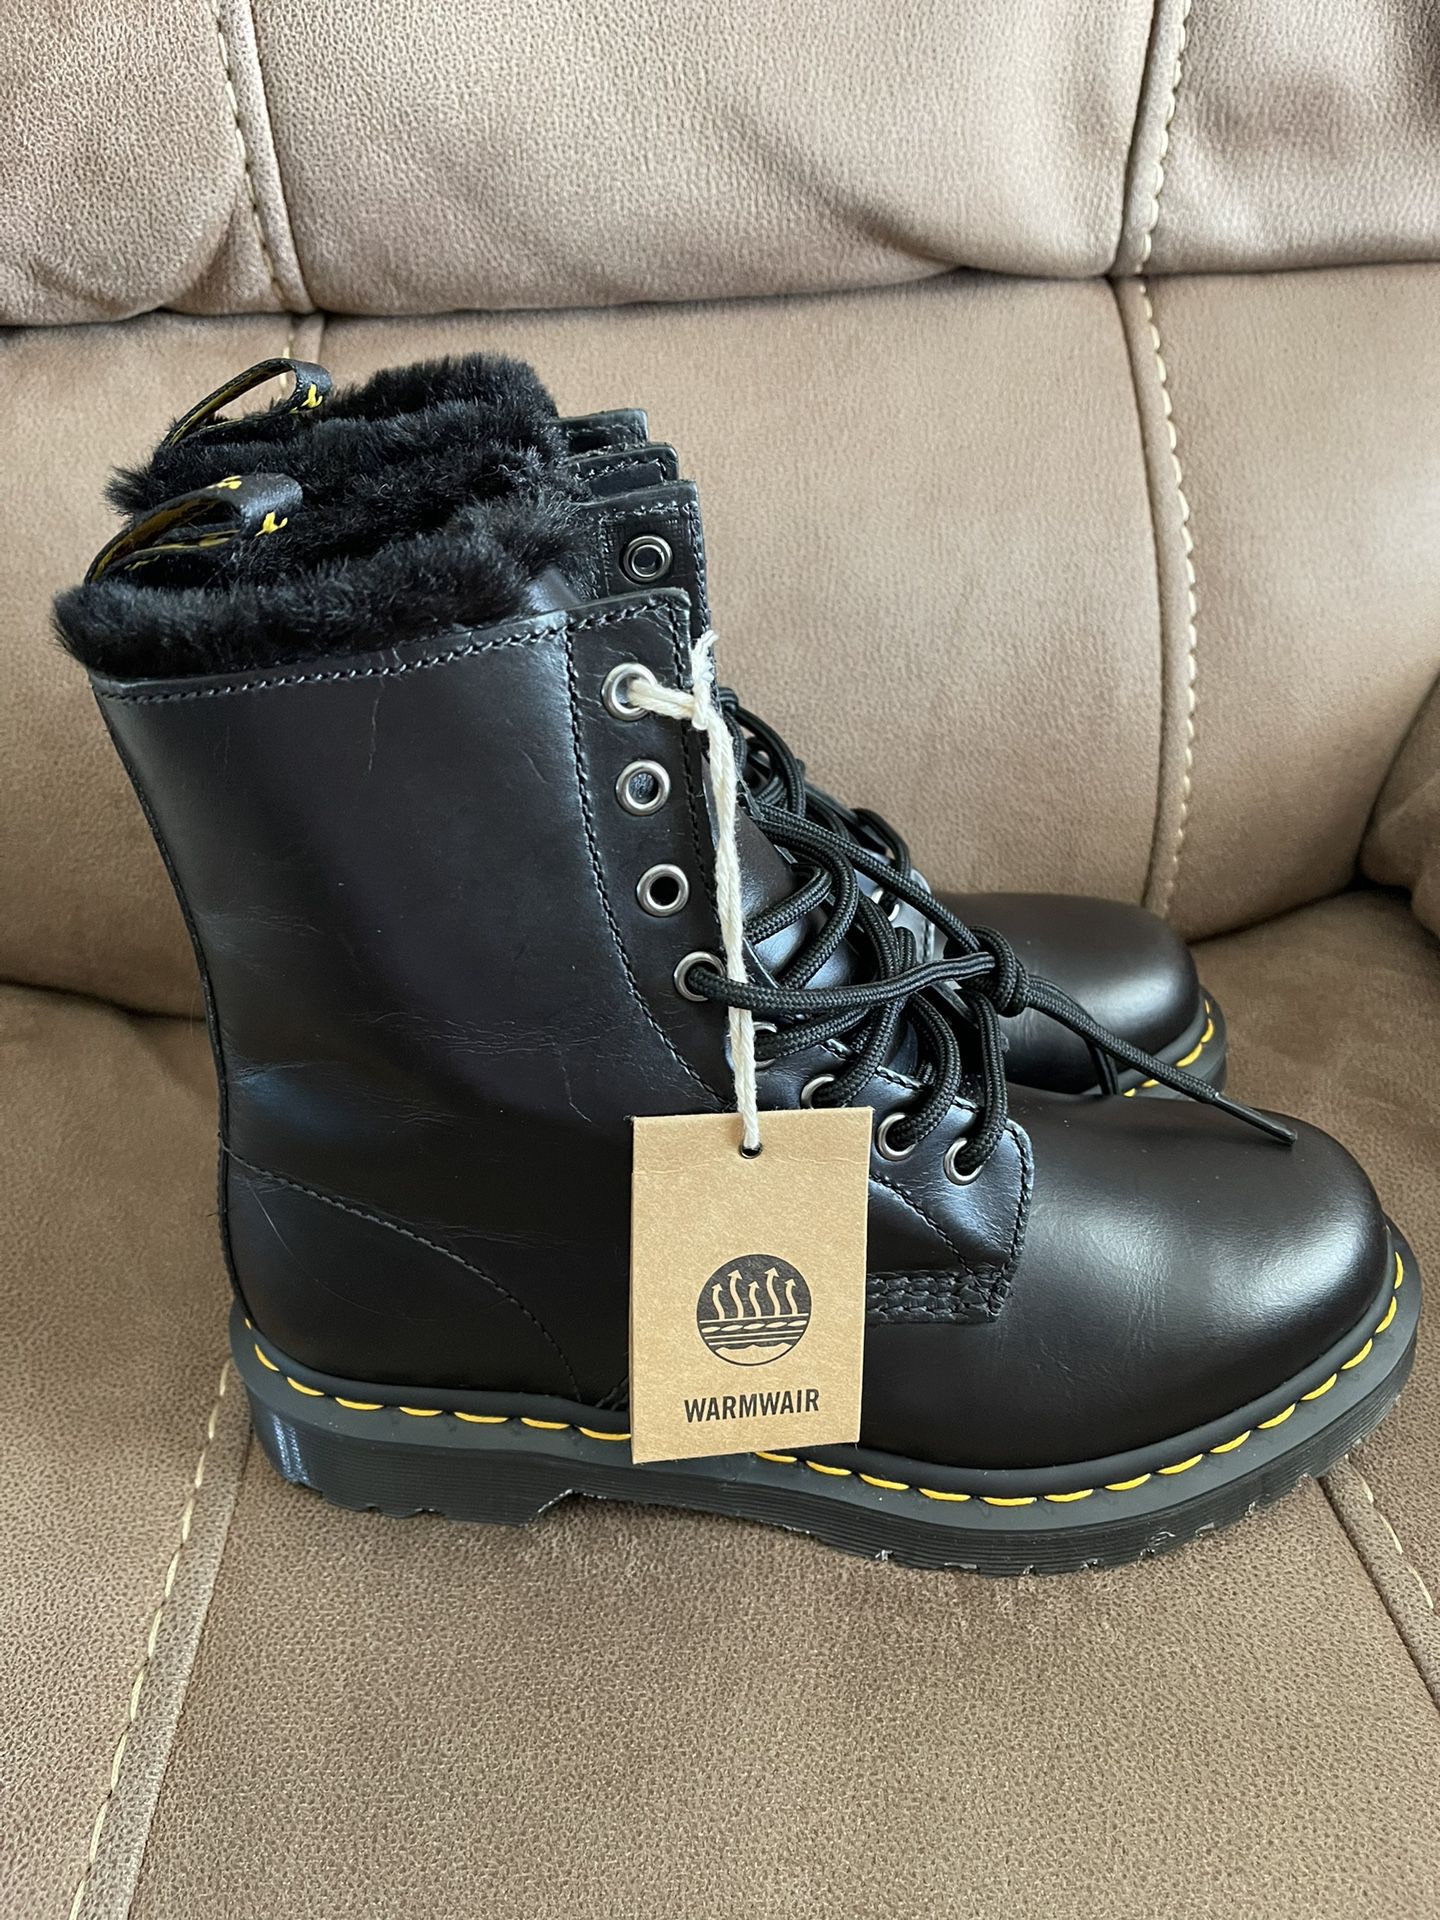 Dr Marten’s Boots With Fur Inside Size 8.